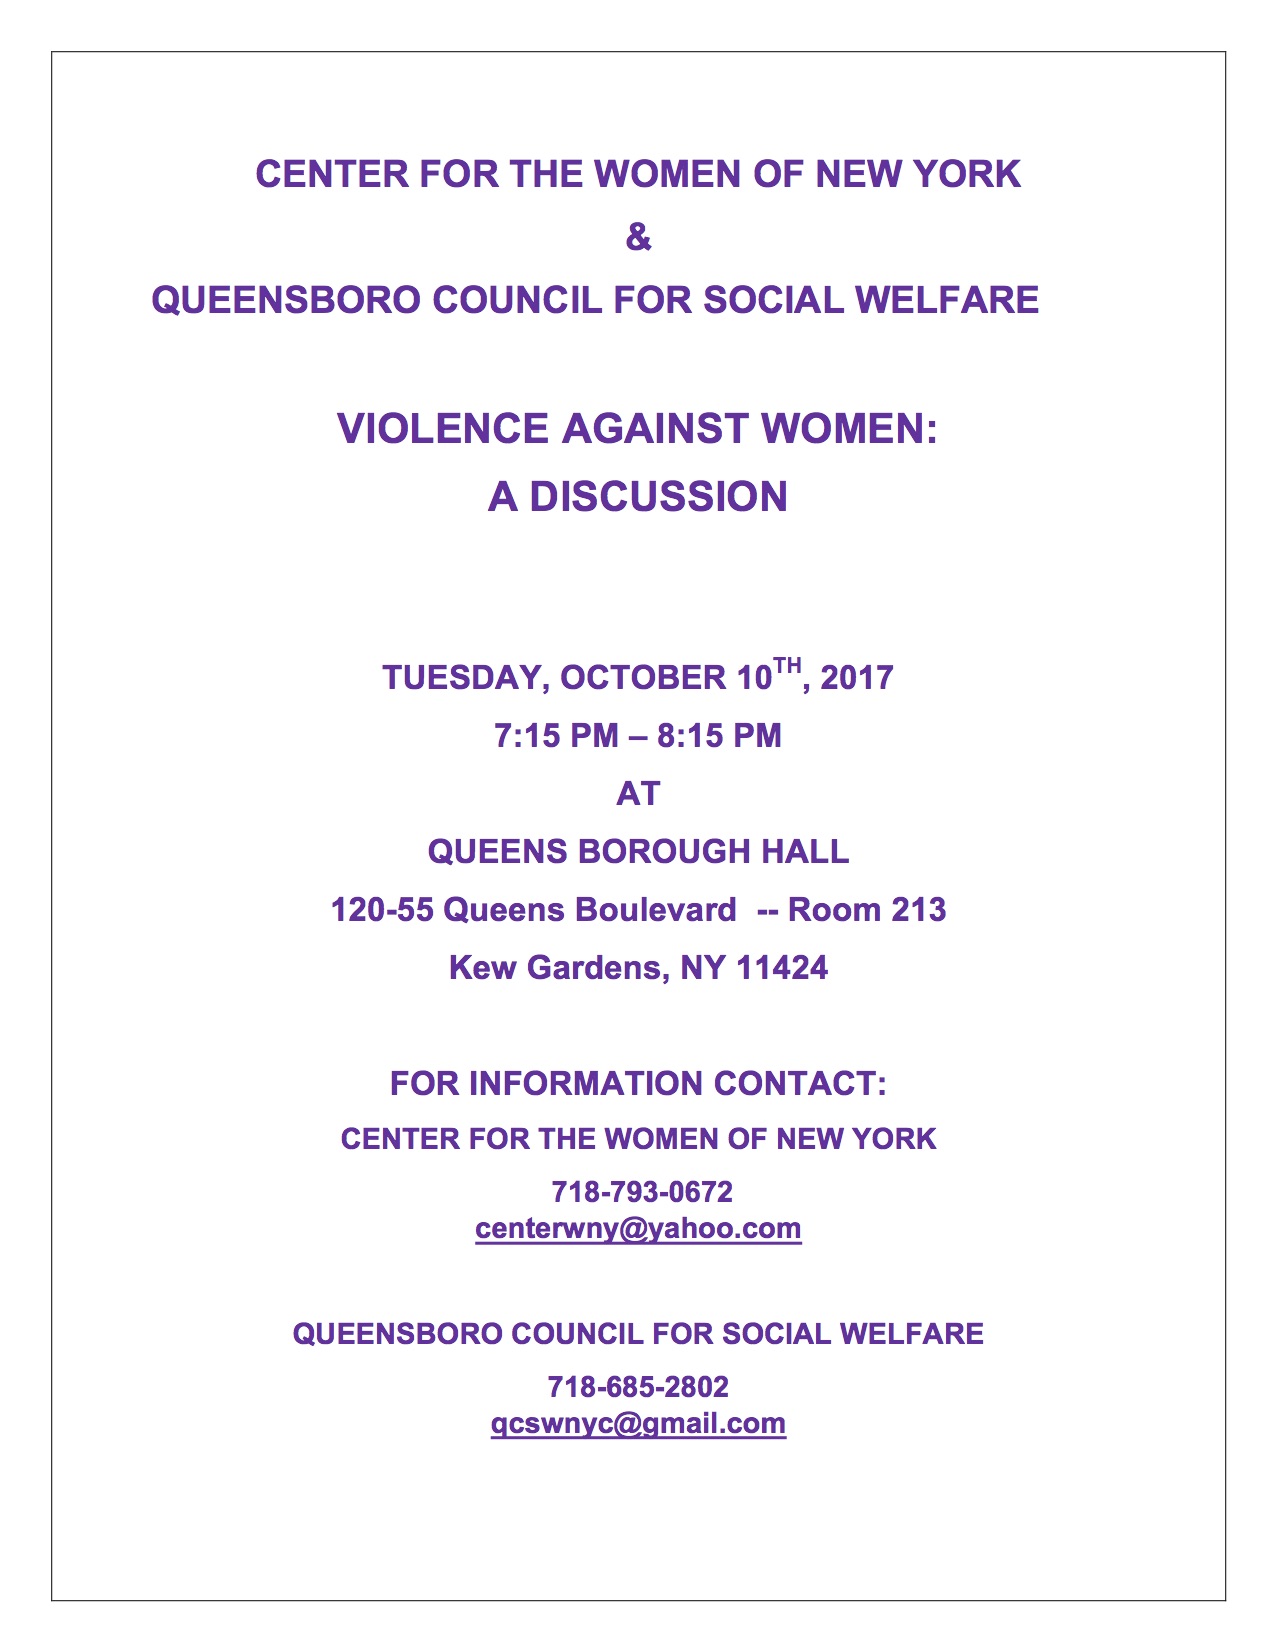 Violence Against Women: A Discussion @ Queensborough Hall, Room 213